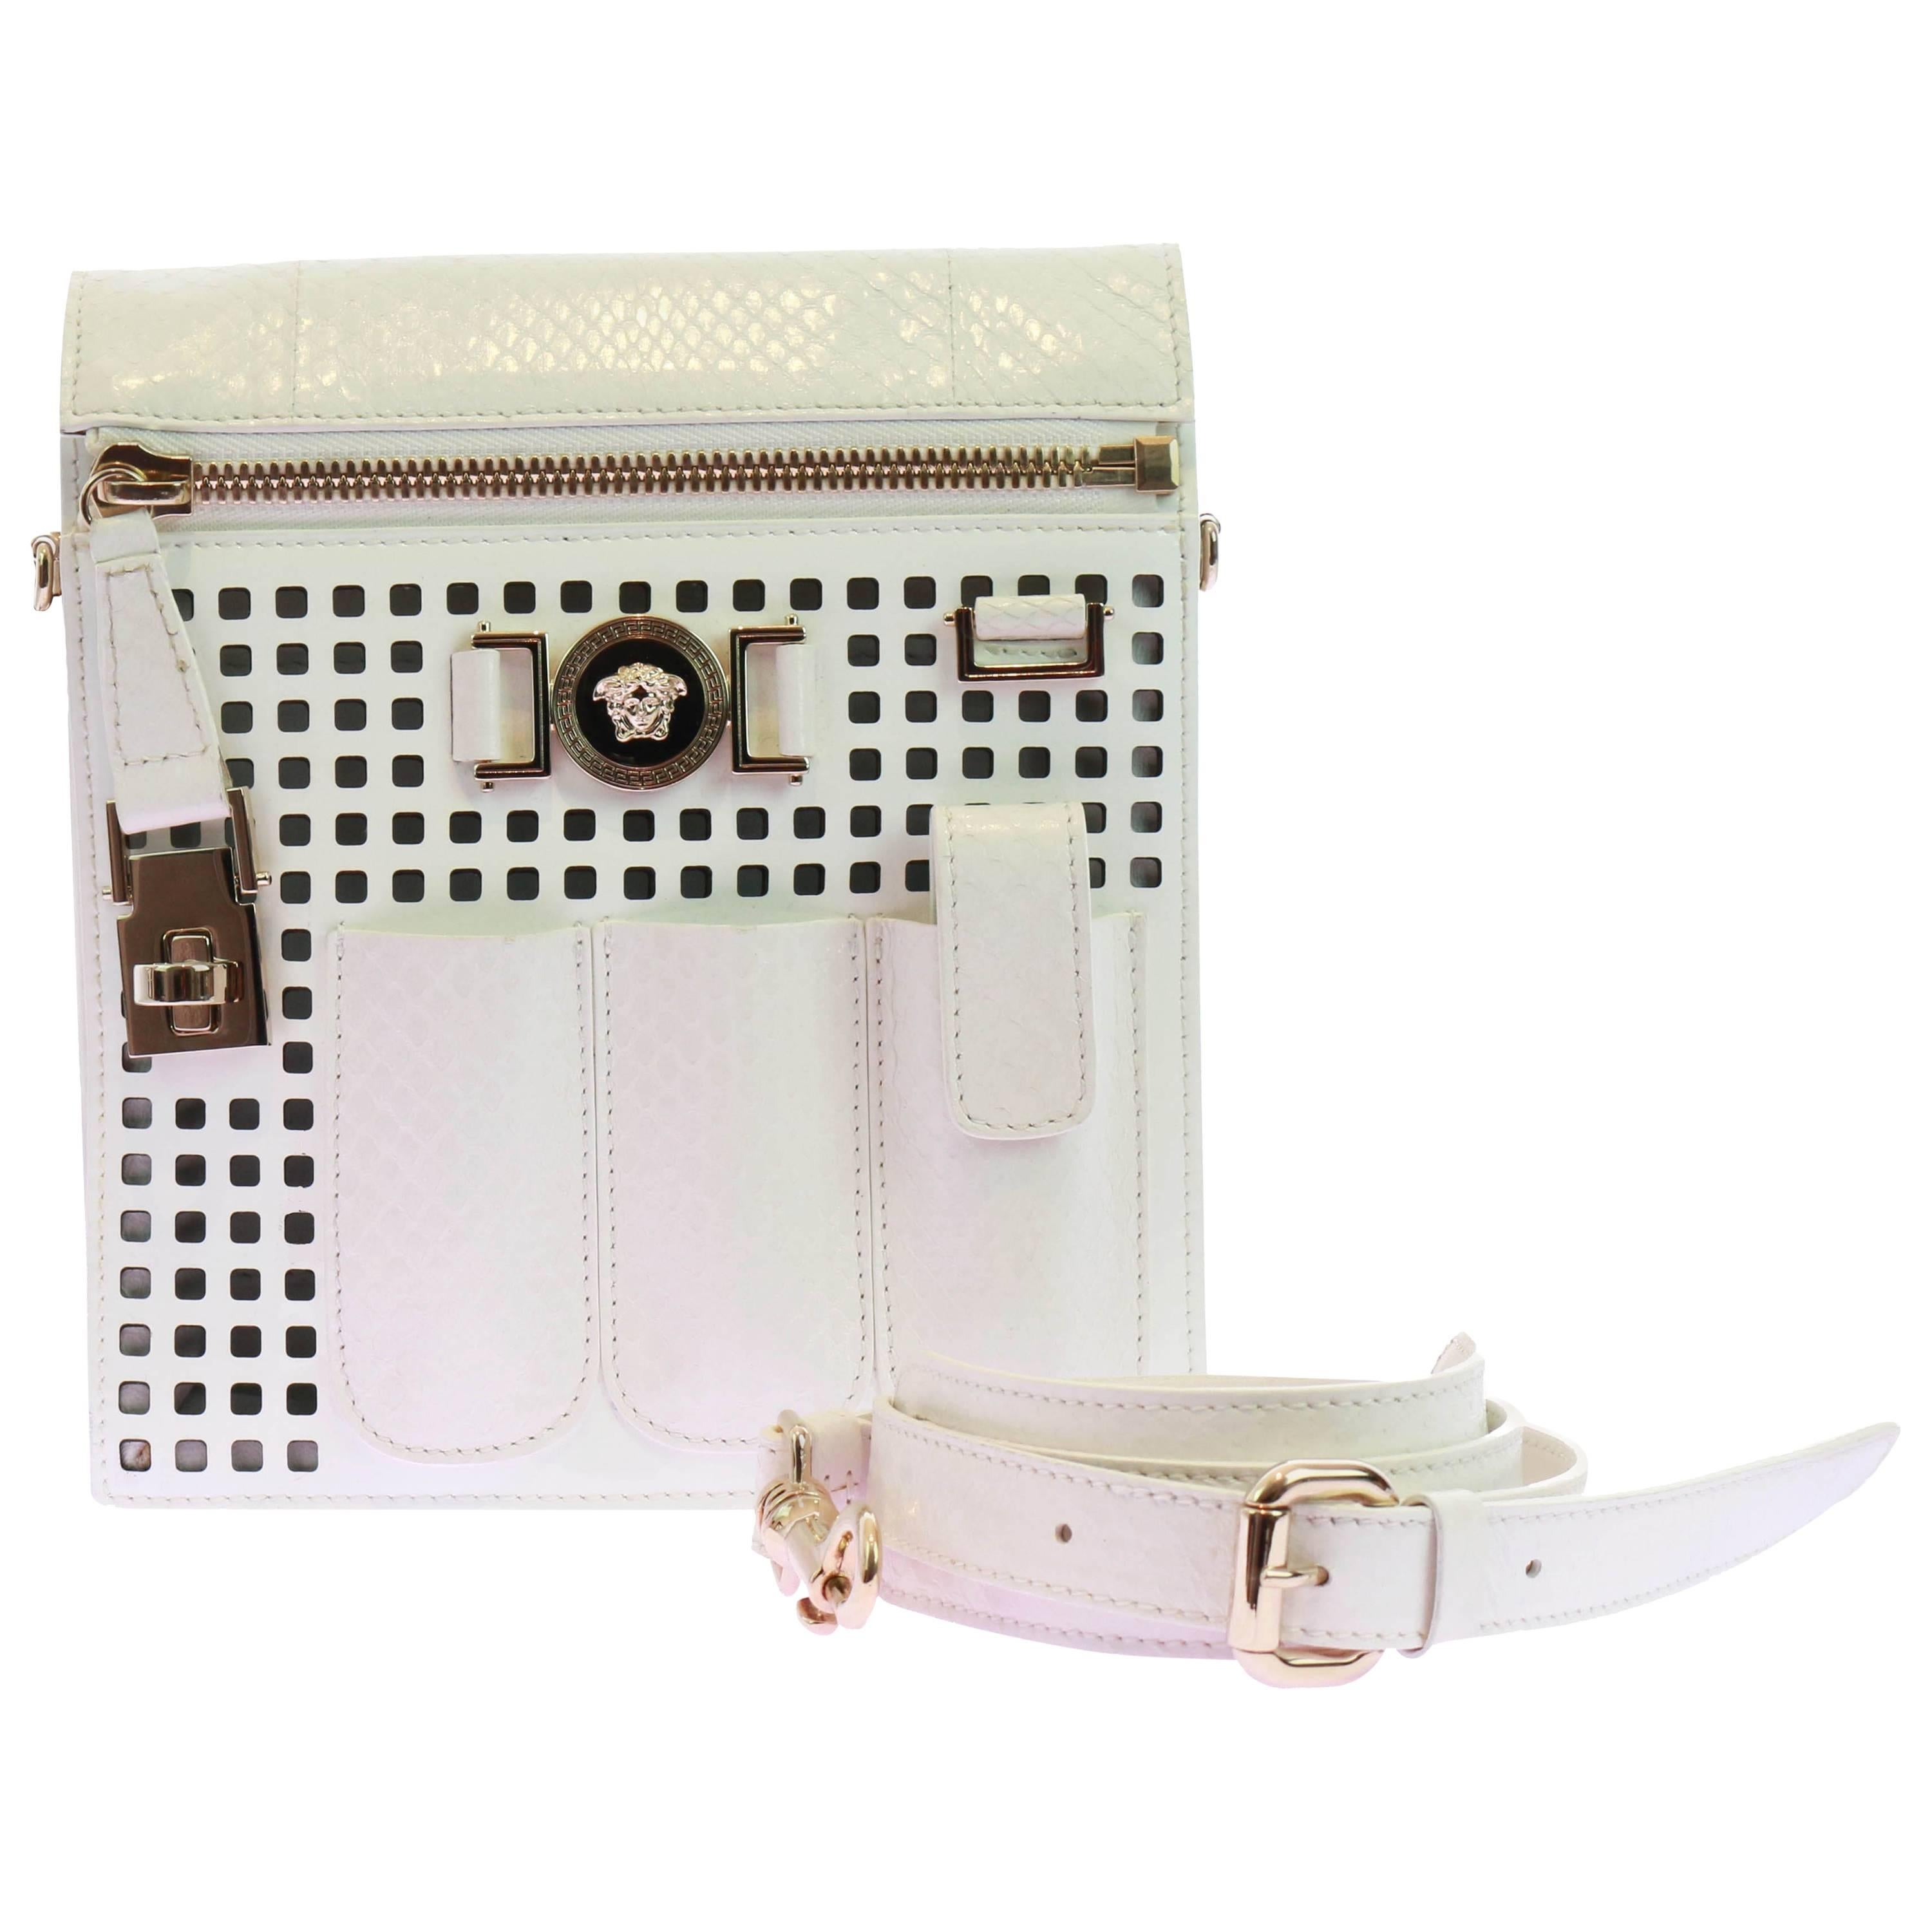 New VERSACE PERFORATED PATENT LEATHER WHITE CROSSBODY BAG